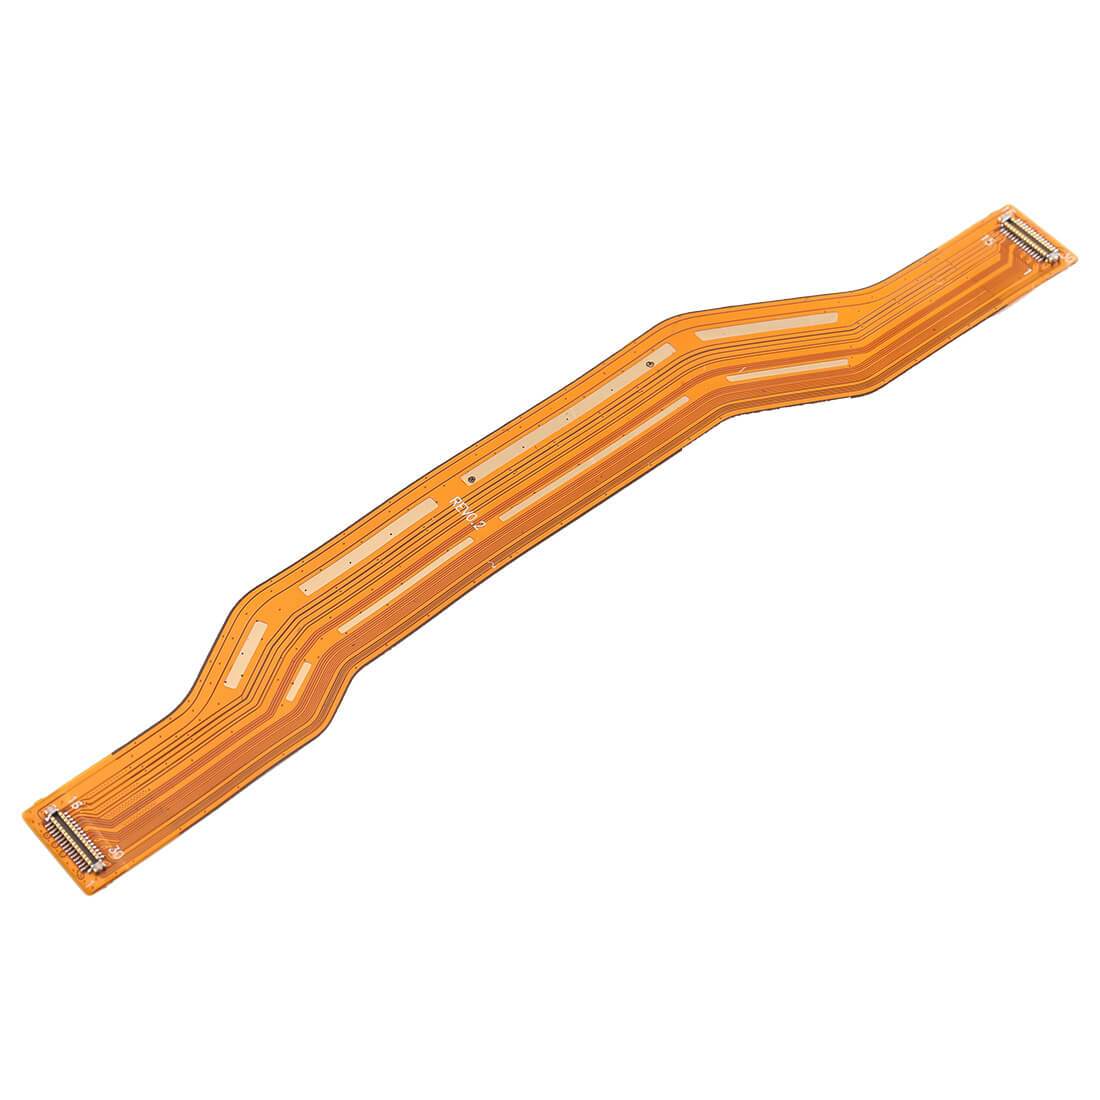 Main Motherboard Flex Cable For Samsung Galaxy A10s A107 Replacement Connection